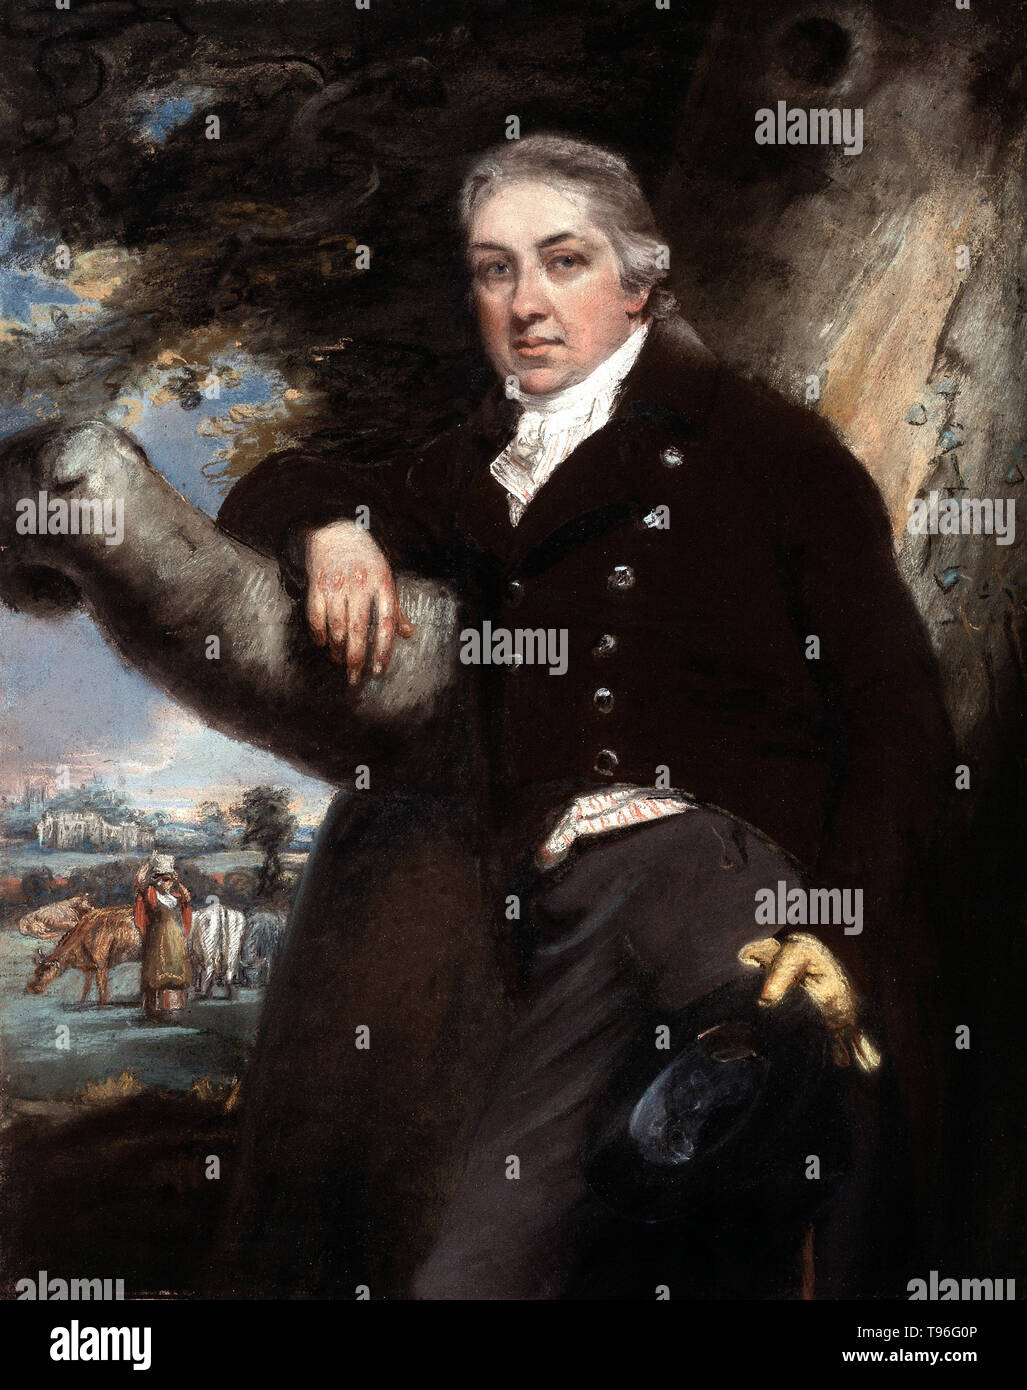 Edward Jenner (May 17, 1749 - January 26, 1823) was an English physician and scientist who was the pioneer of smallpox vaccine, the world's first vaccine. His work is said to have saved more lives than the work of any other human. In Jenner’s time, smallpox killed around 10 percent of the population, with the number as high as 20 percent in towns and cities where infection spread more easily. Pastel by John Raphael Smith, undated. Stock Photo